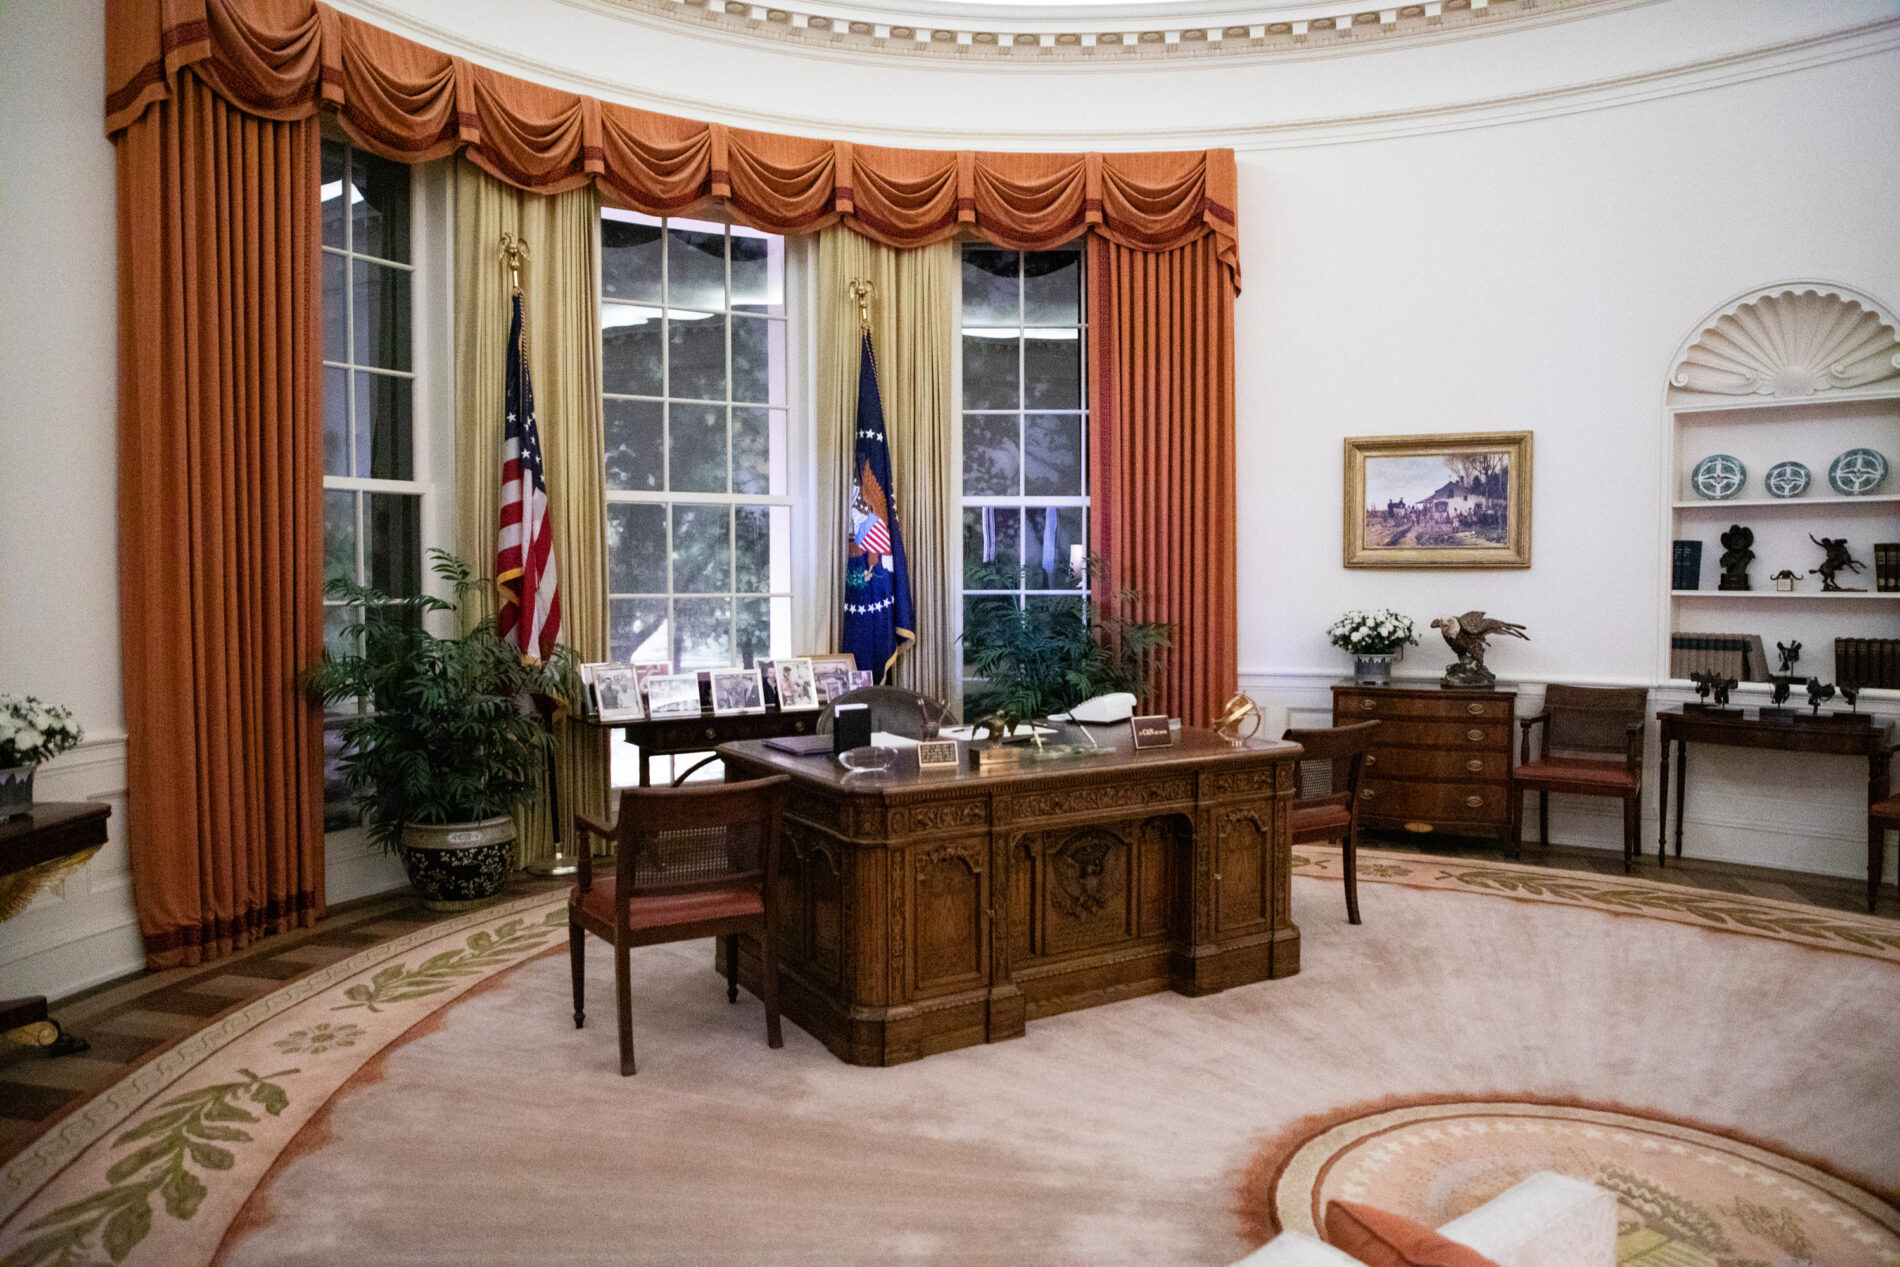 The Oval Office mock-up in the Ronald Reagan Library.